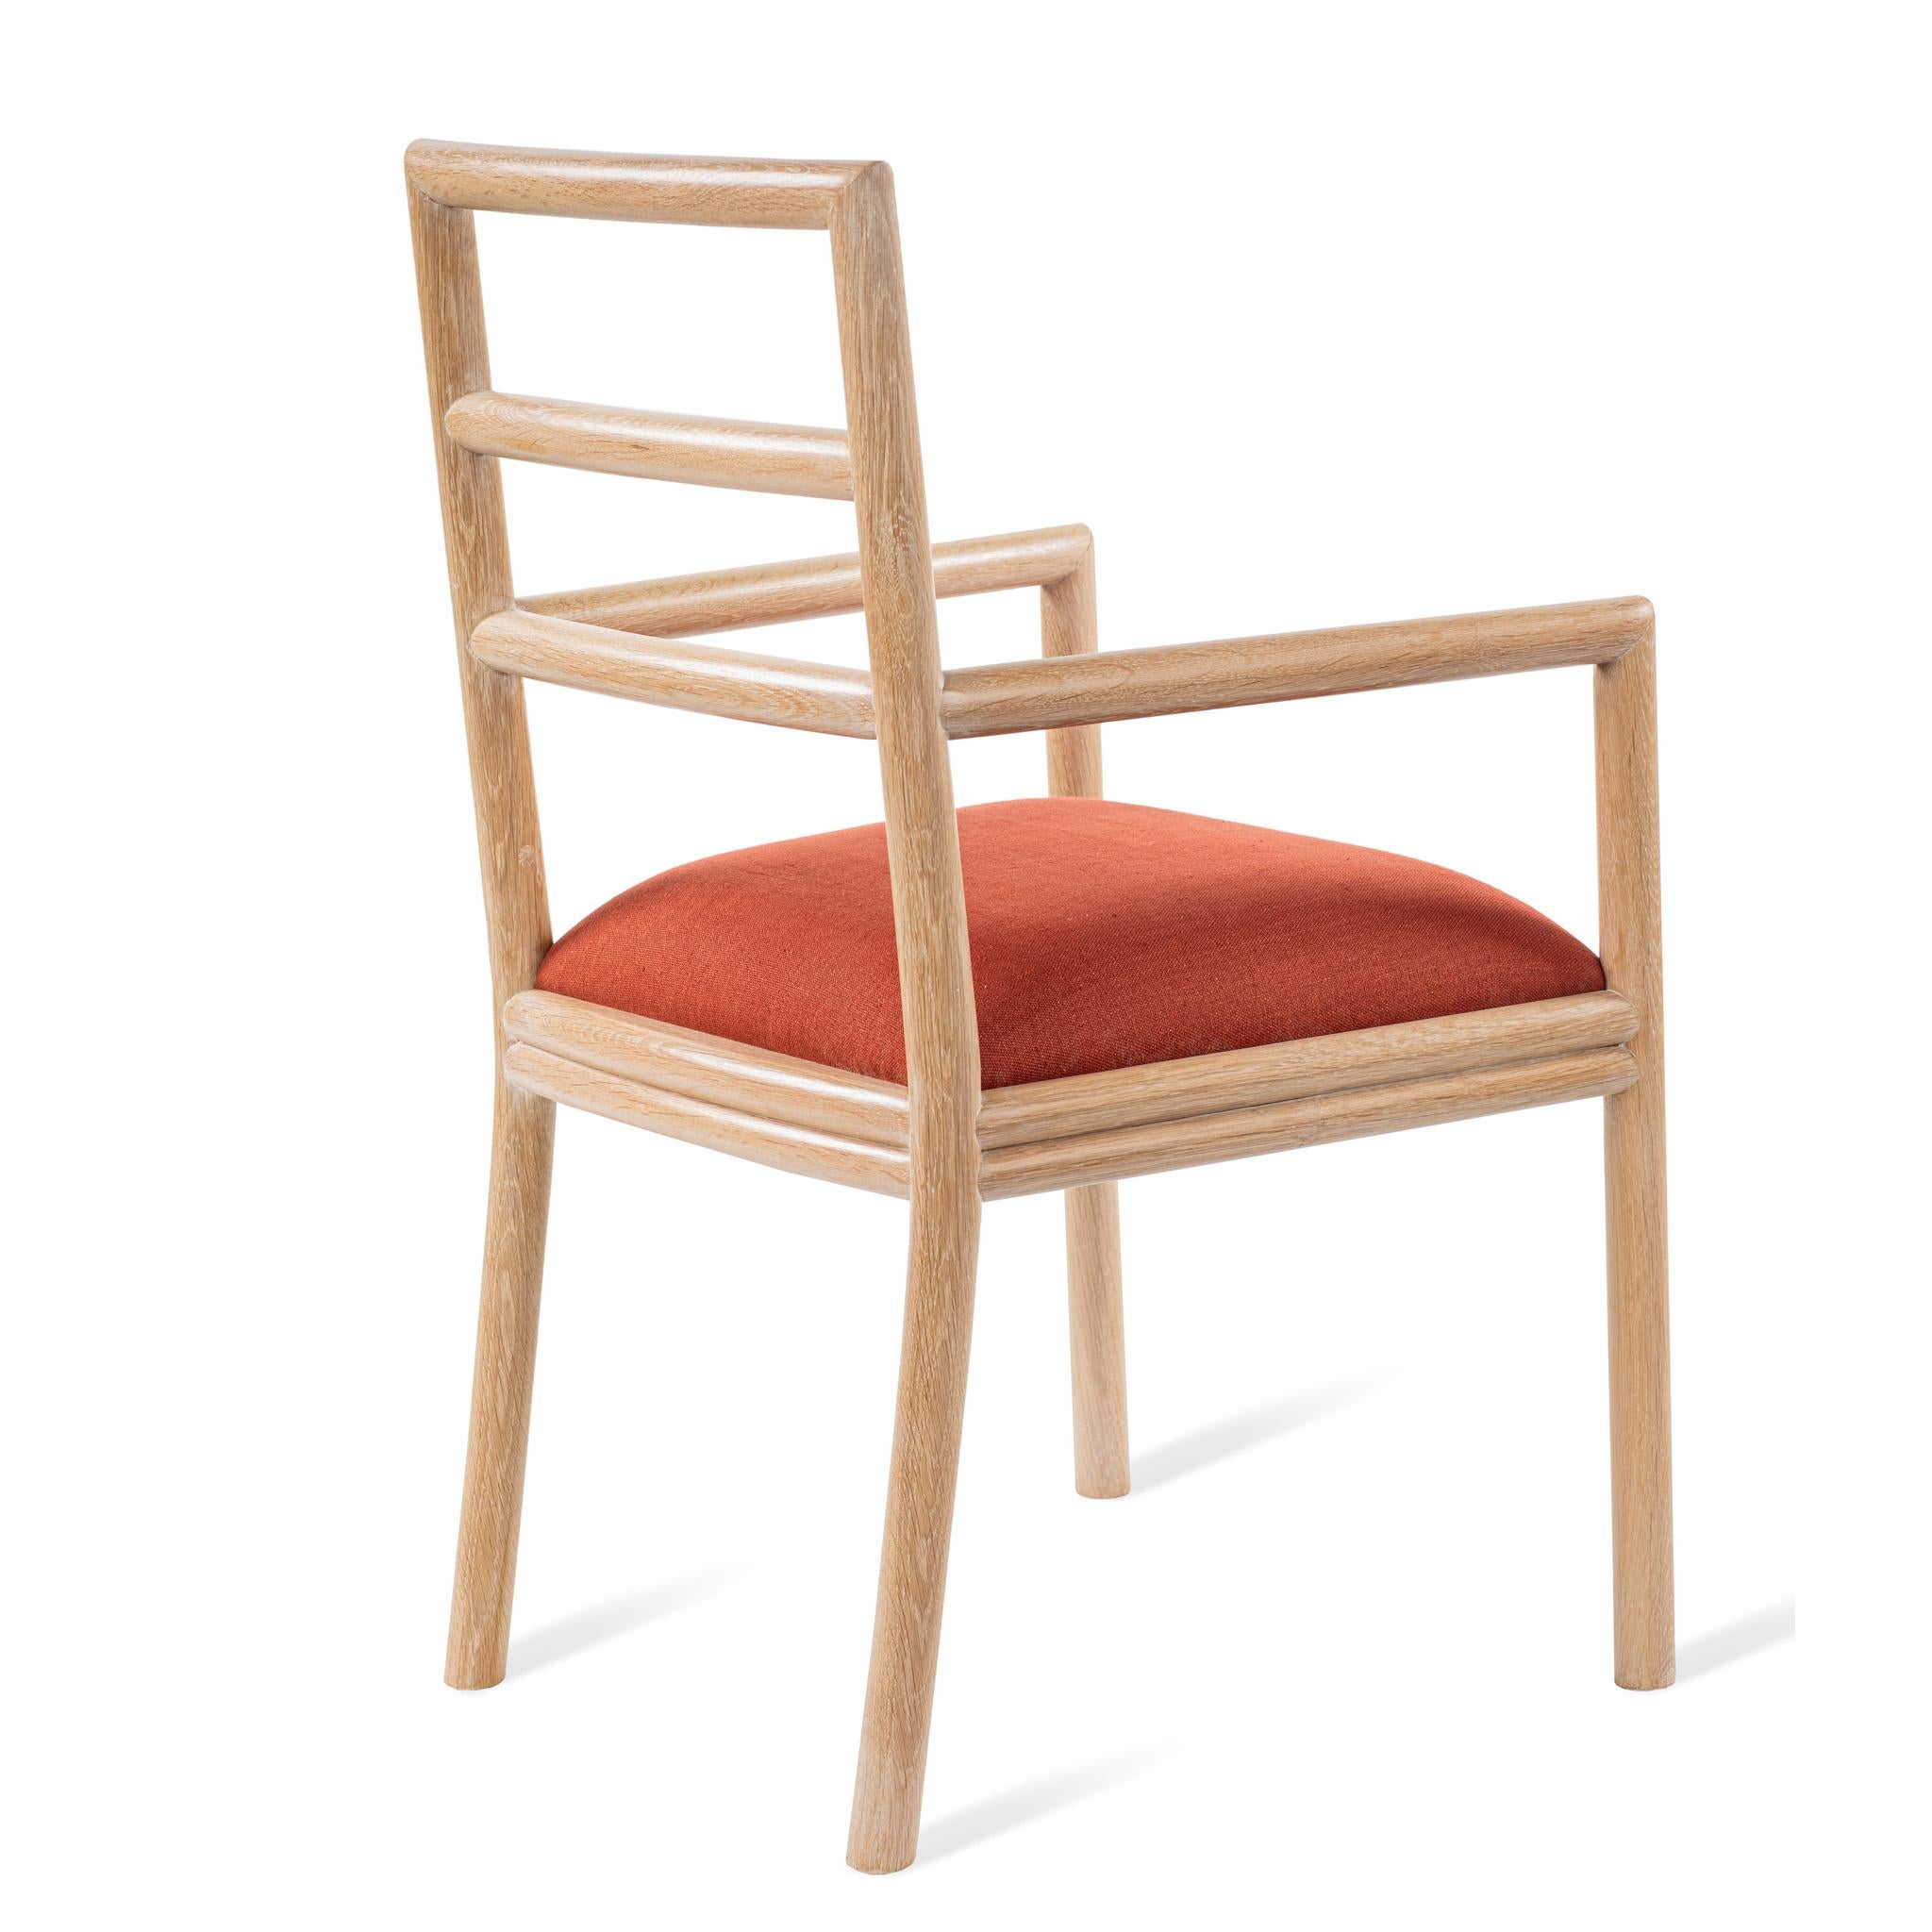 Designed by Josh Greene.
Also available in a side chair. 